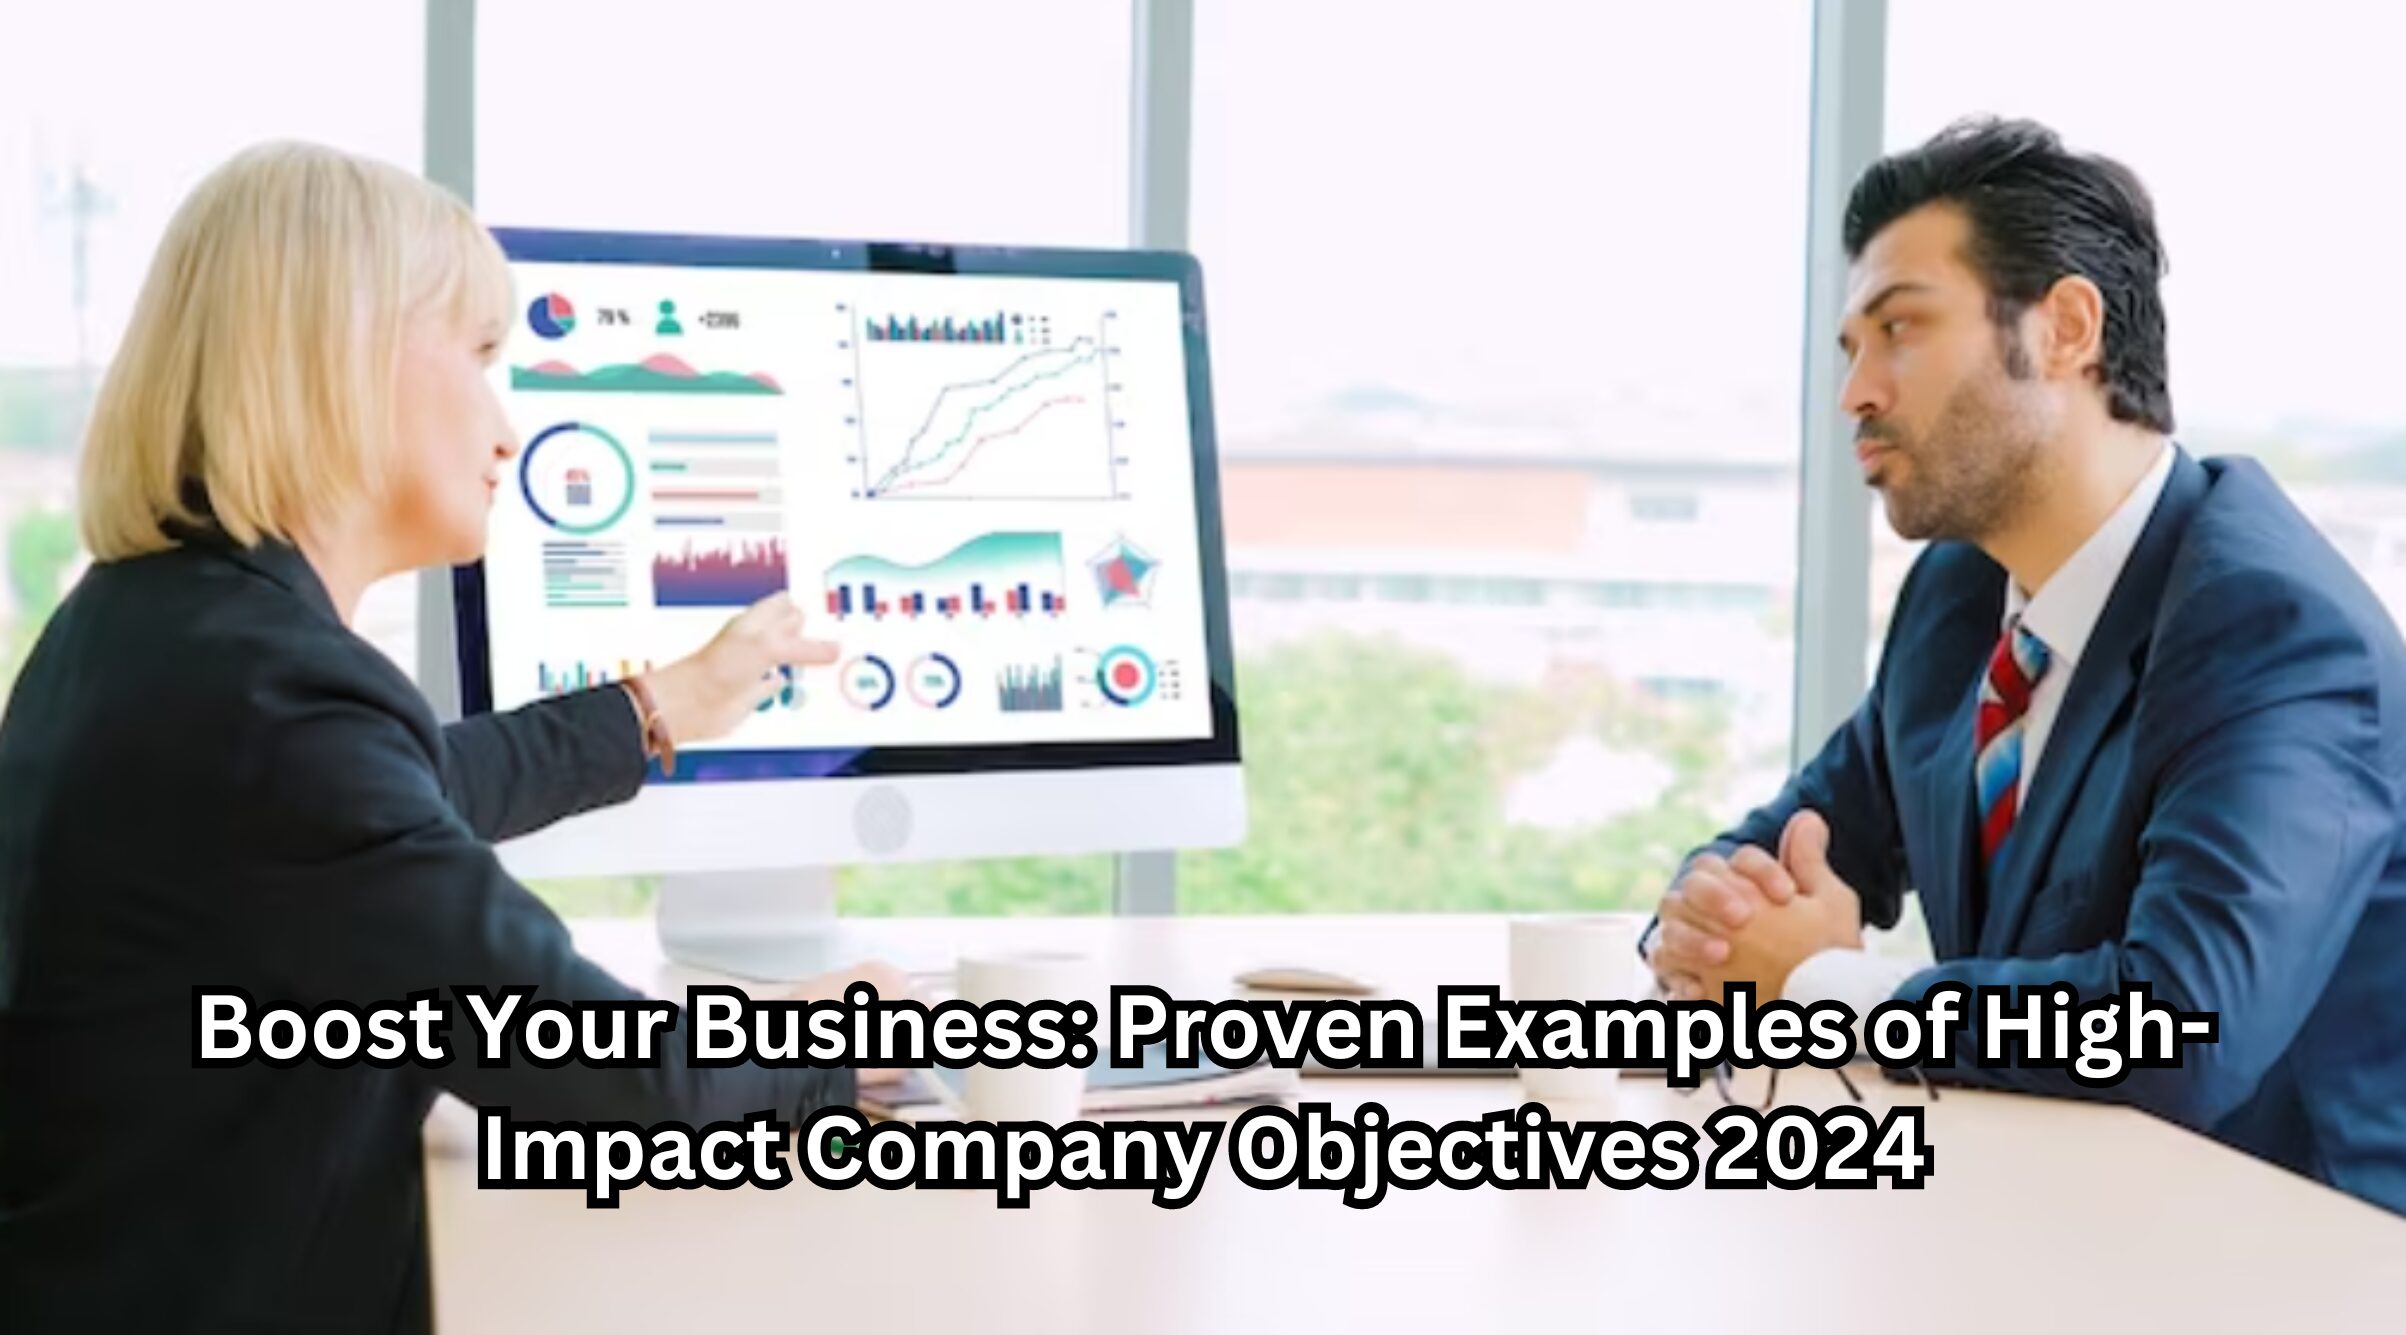 A dynamic collage showcasing various successful business strategies and objectives for 2024, including graphs, team meetings, and innovative technology, illustrating examples of high-impact company objectives.